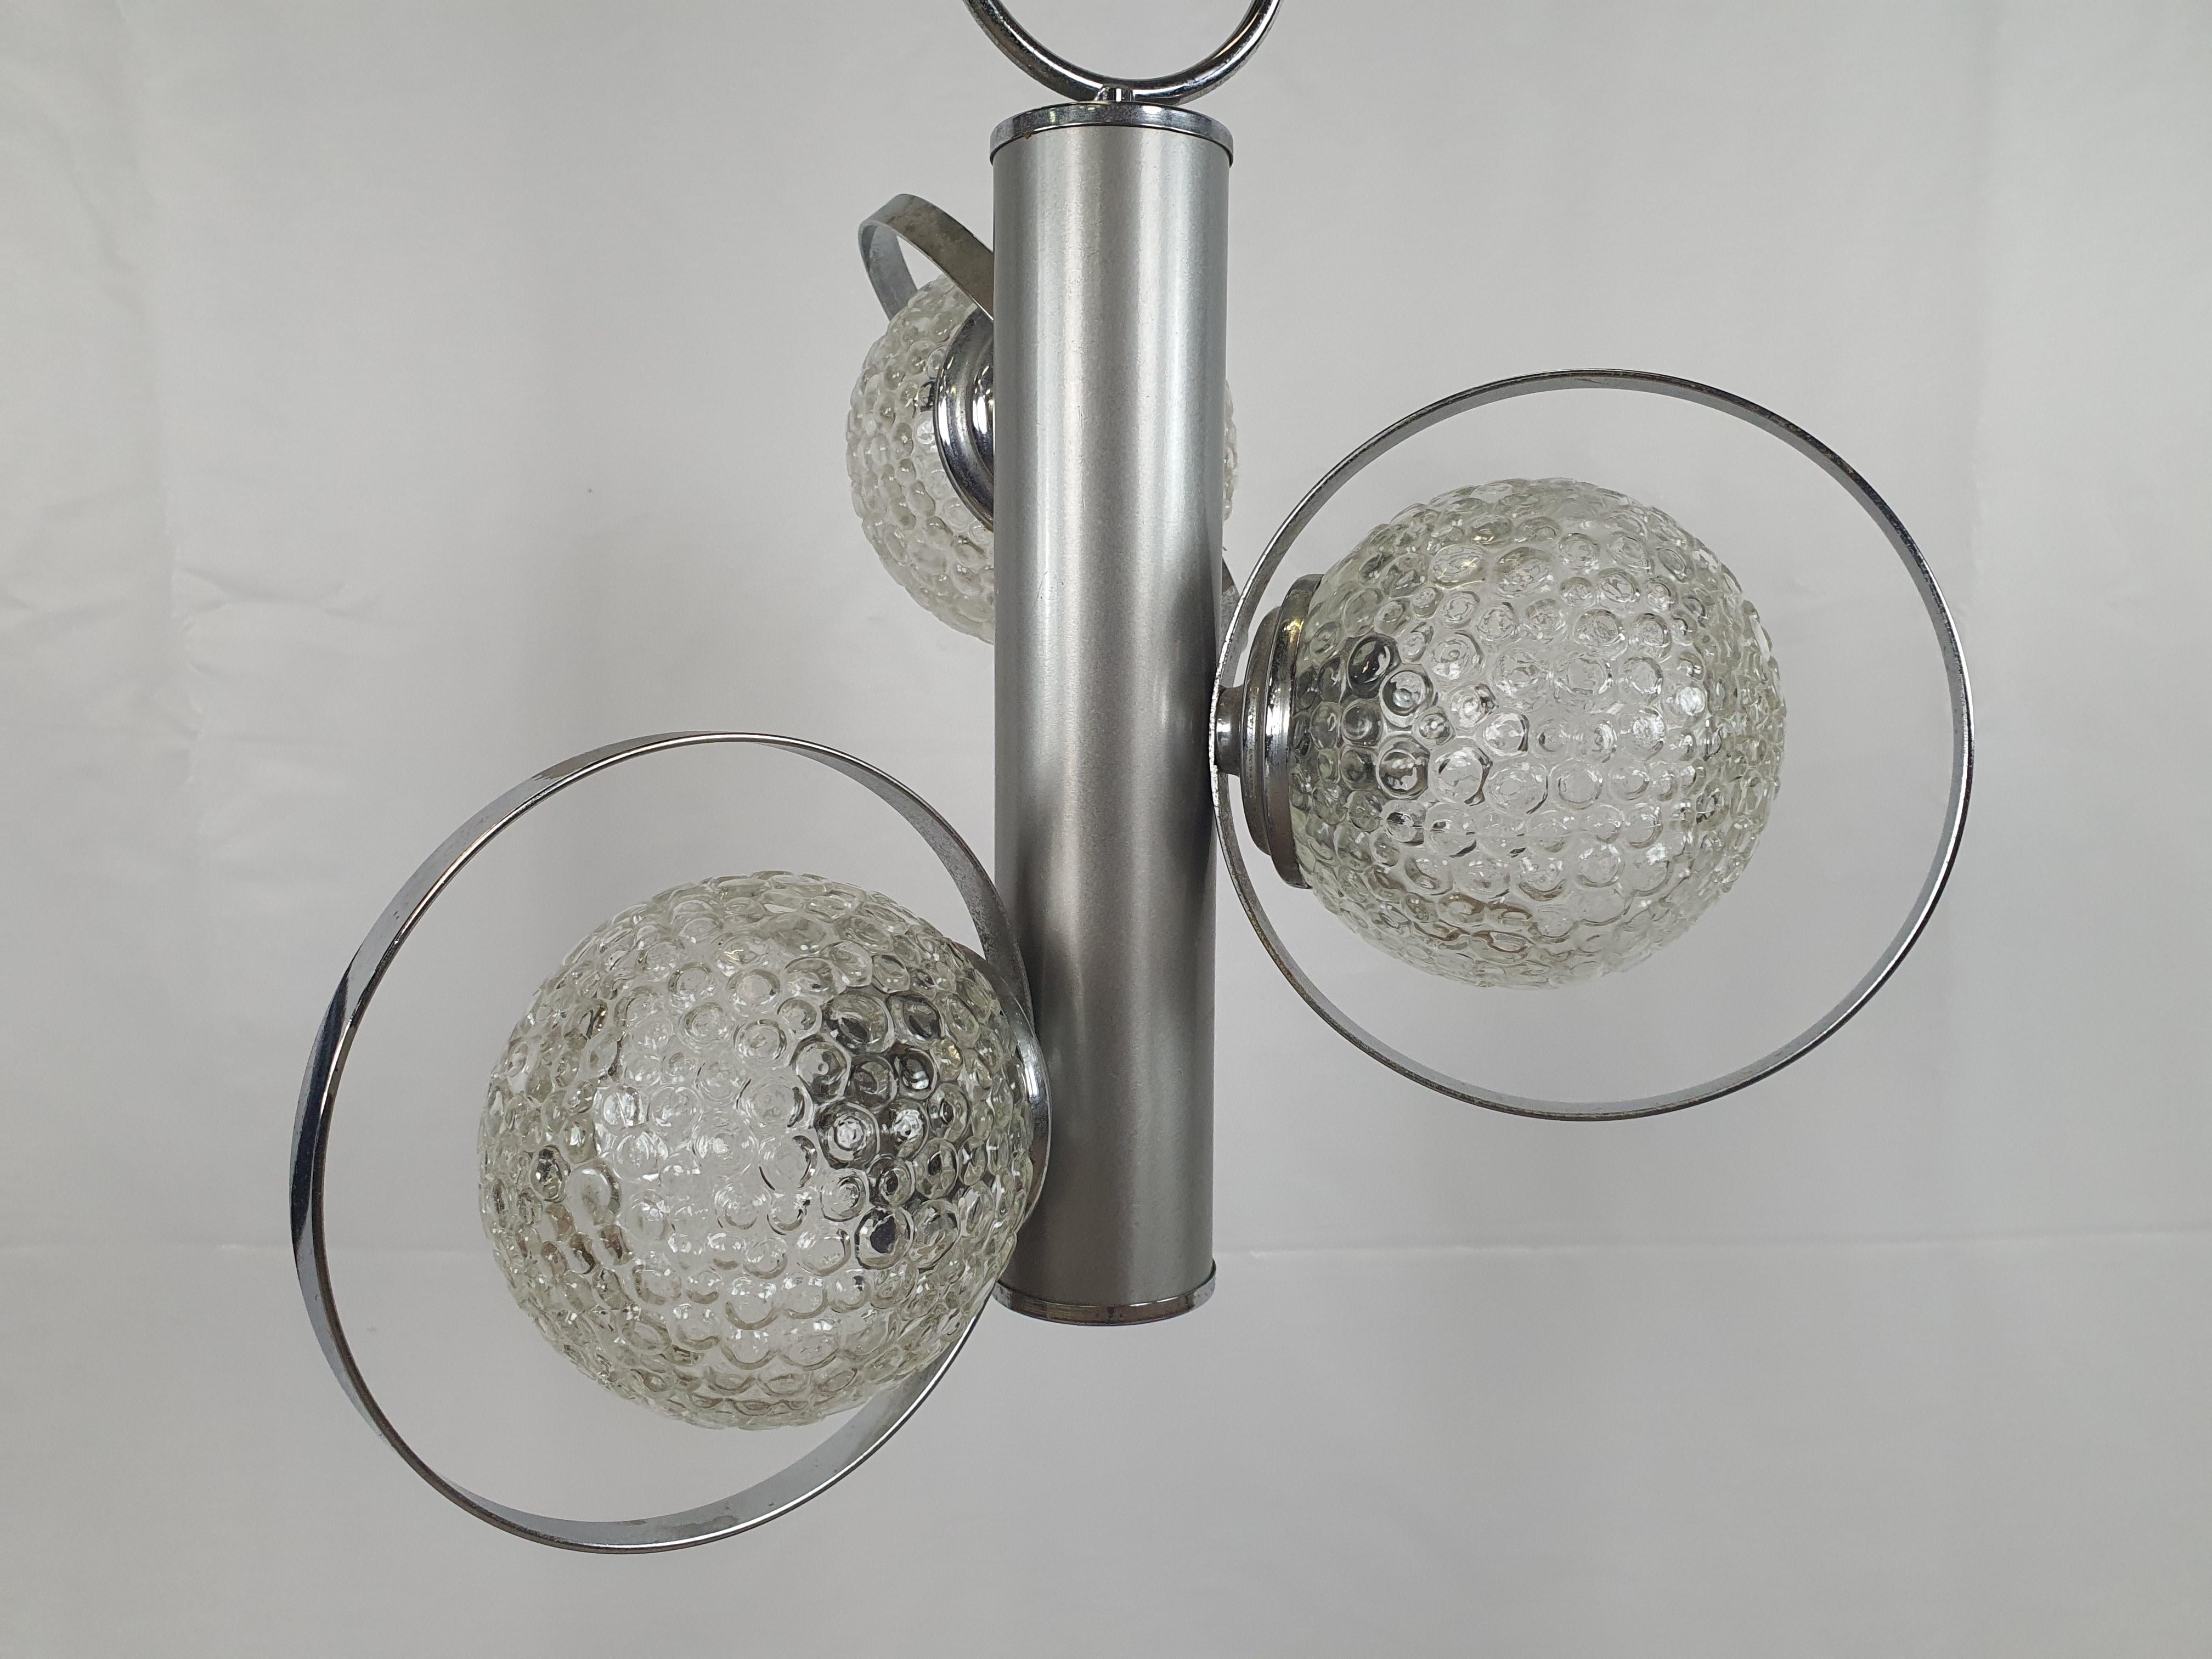 1970s Italian-made metal chandelier with 3 light points in worked glass spheres.

Has normal signs of wear consistent with age and use.
We recommend replacing the electrical parts and/or the electrical system as they are original from the period.